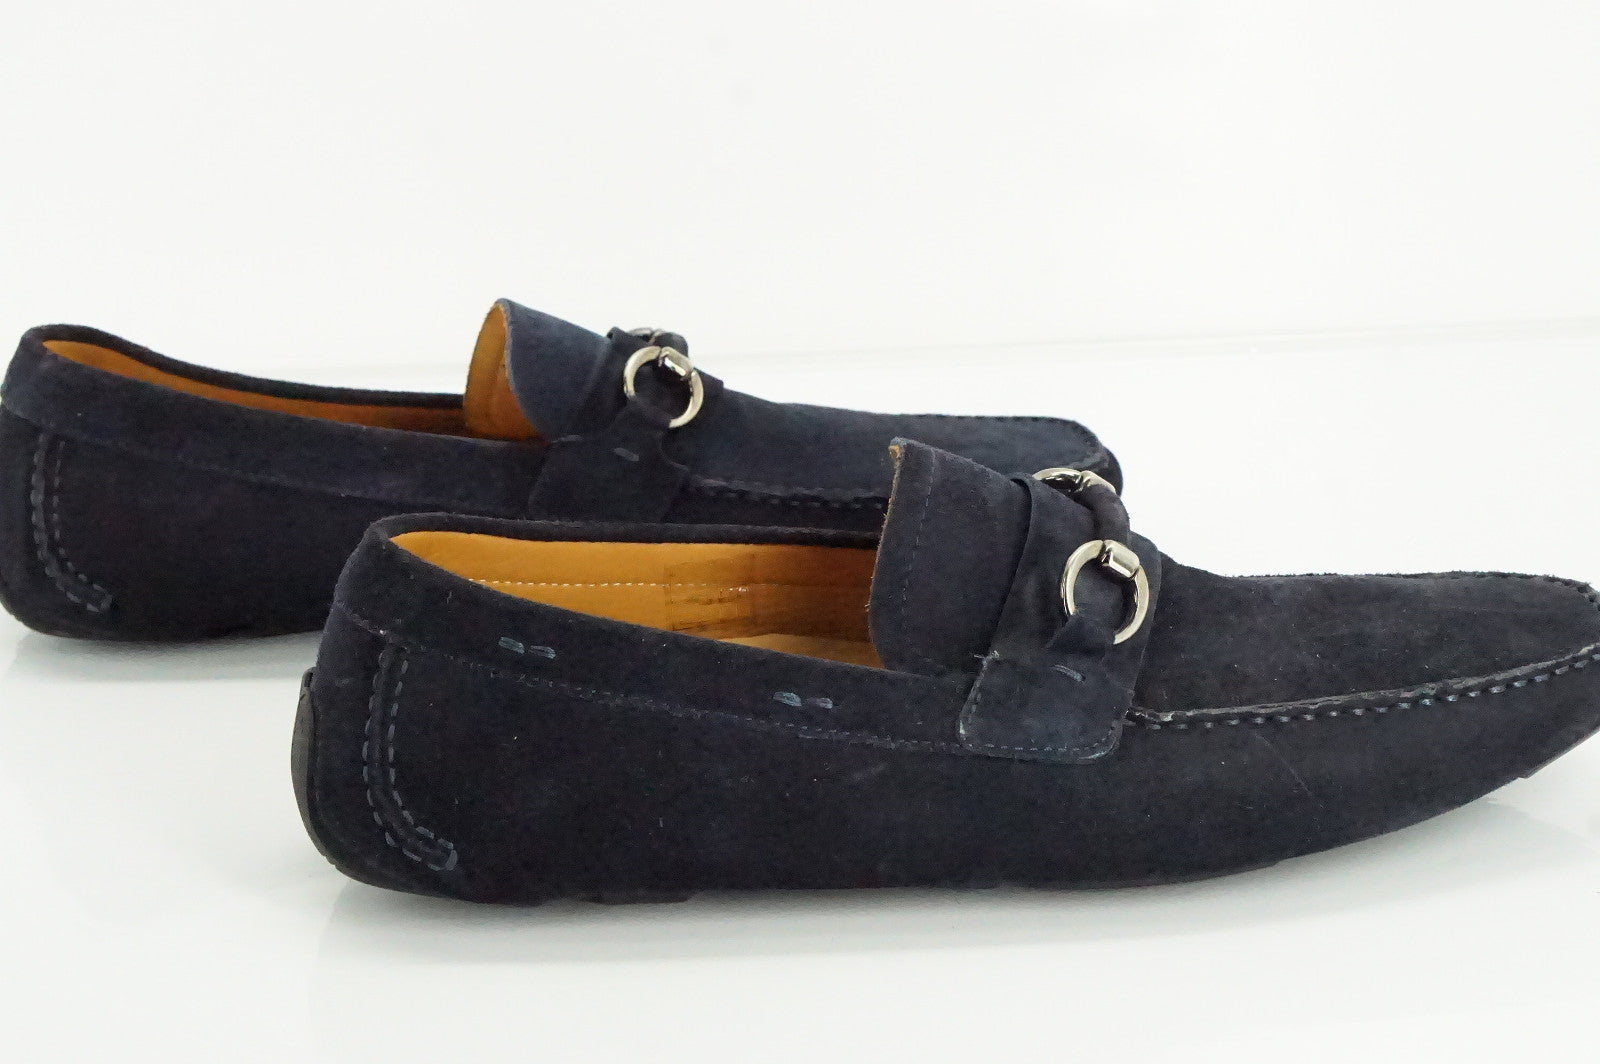 Magnanni Vekio Blue suede driving loafers size 10.5 New Moccasin bit $350